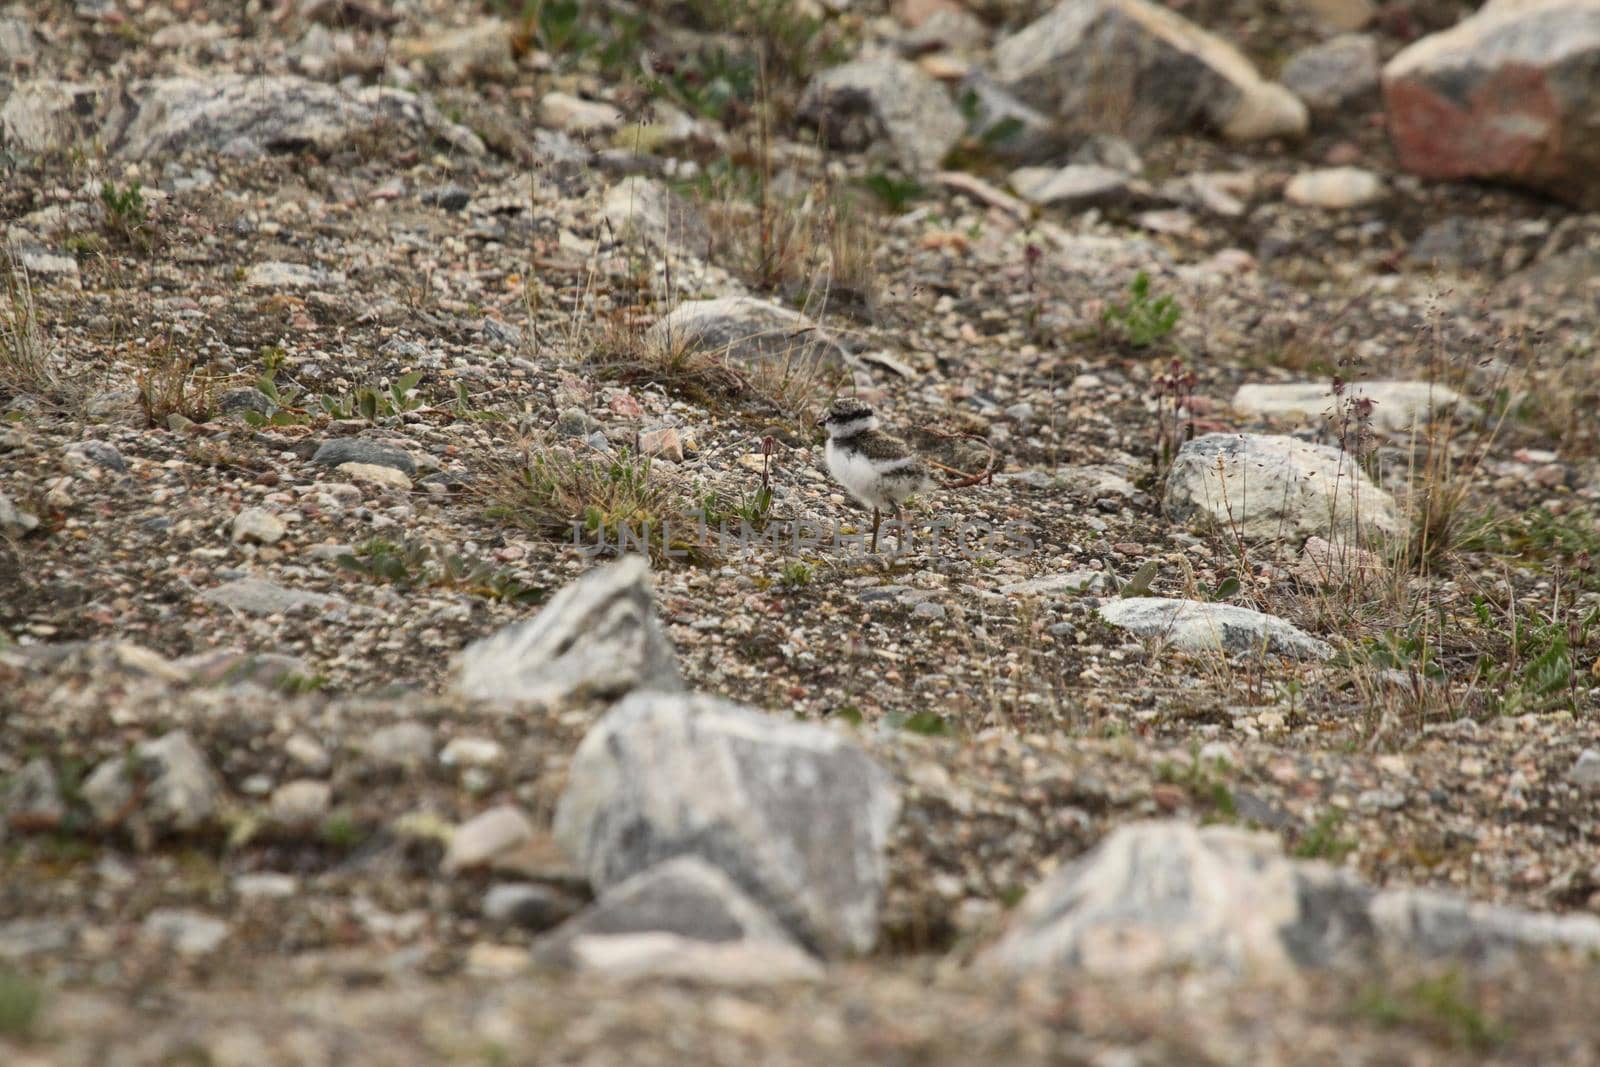 A young common ringed plover walking along a rocky tundra in Canada's arctic. Near Pond Inlet, Nunavut